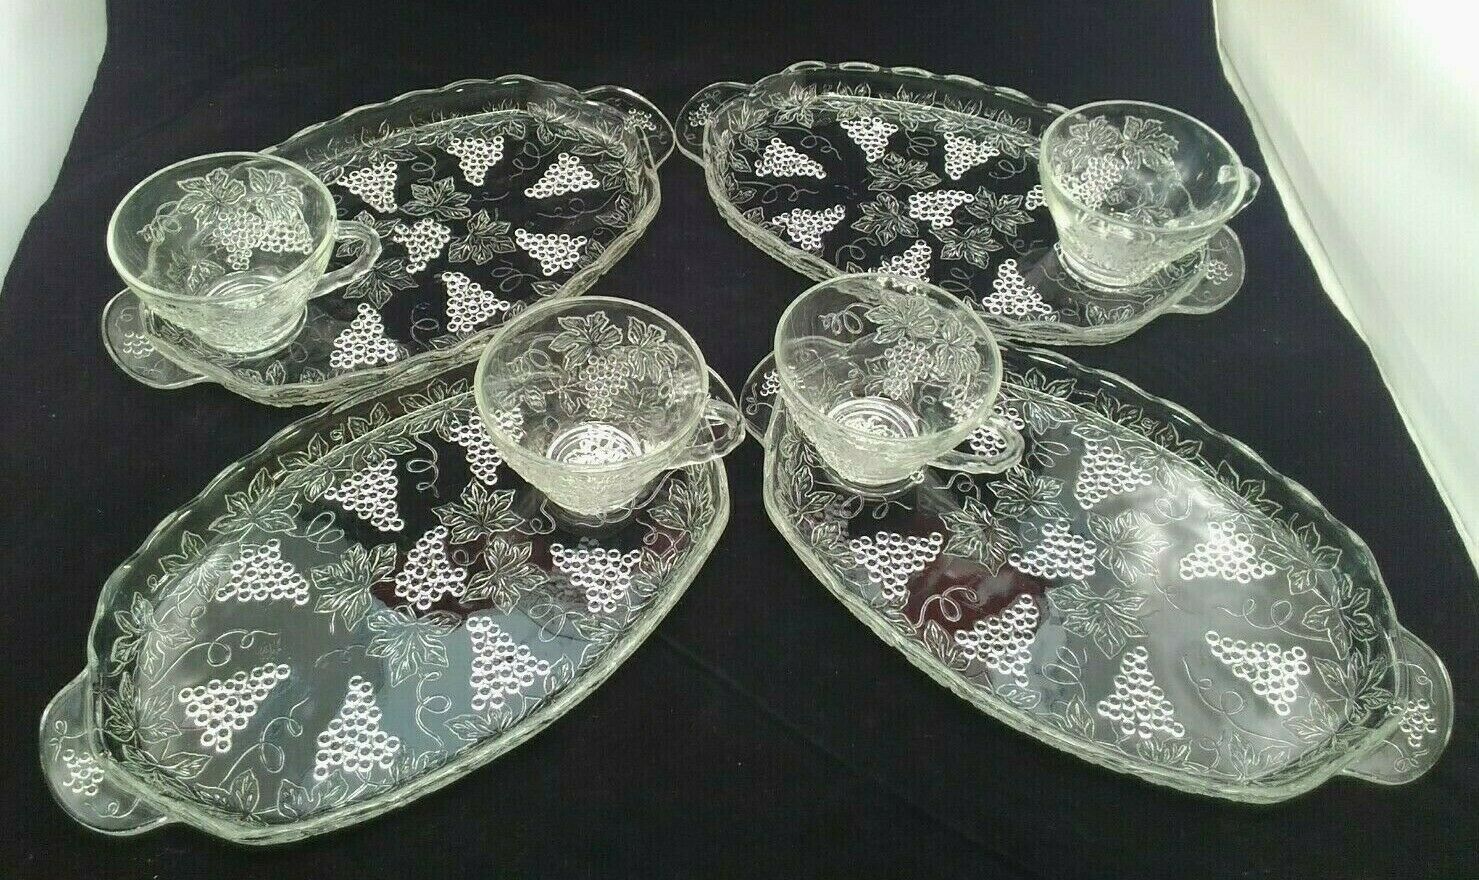 Vintage 1950 Anchor Hocking ? Clear Glass Grapes Serve a snack set Set of Four